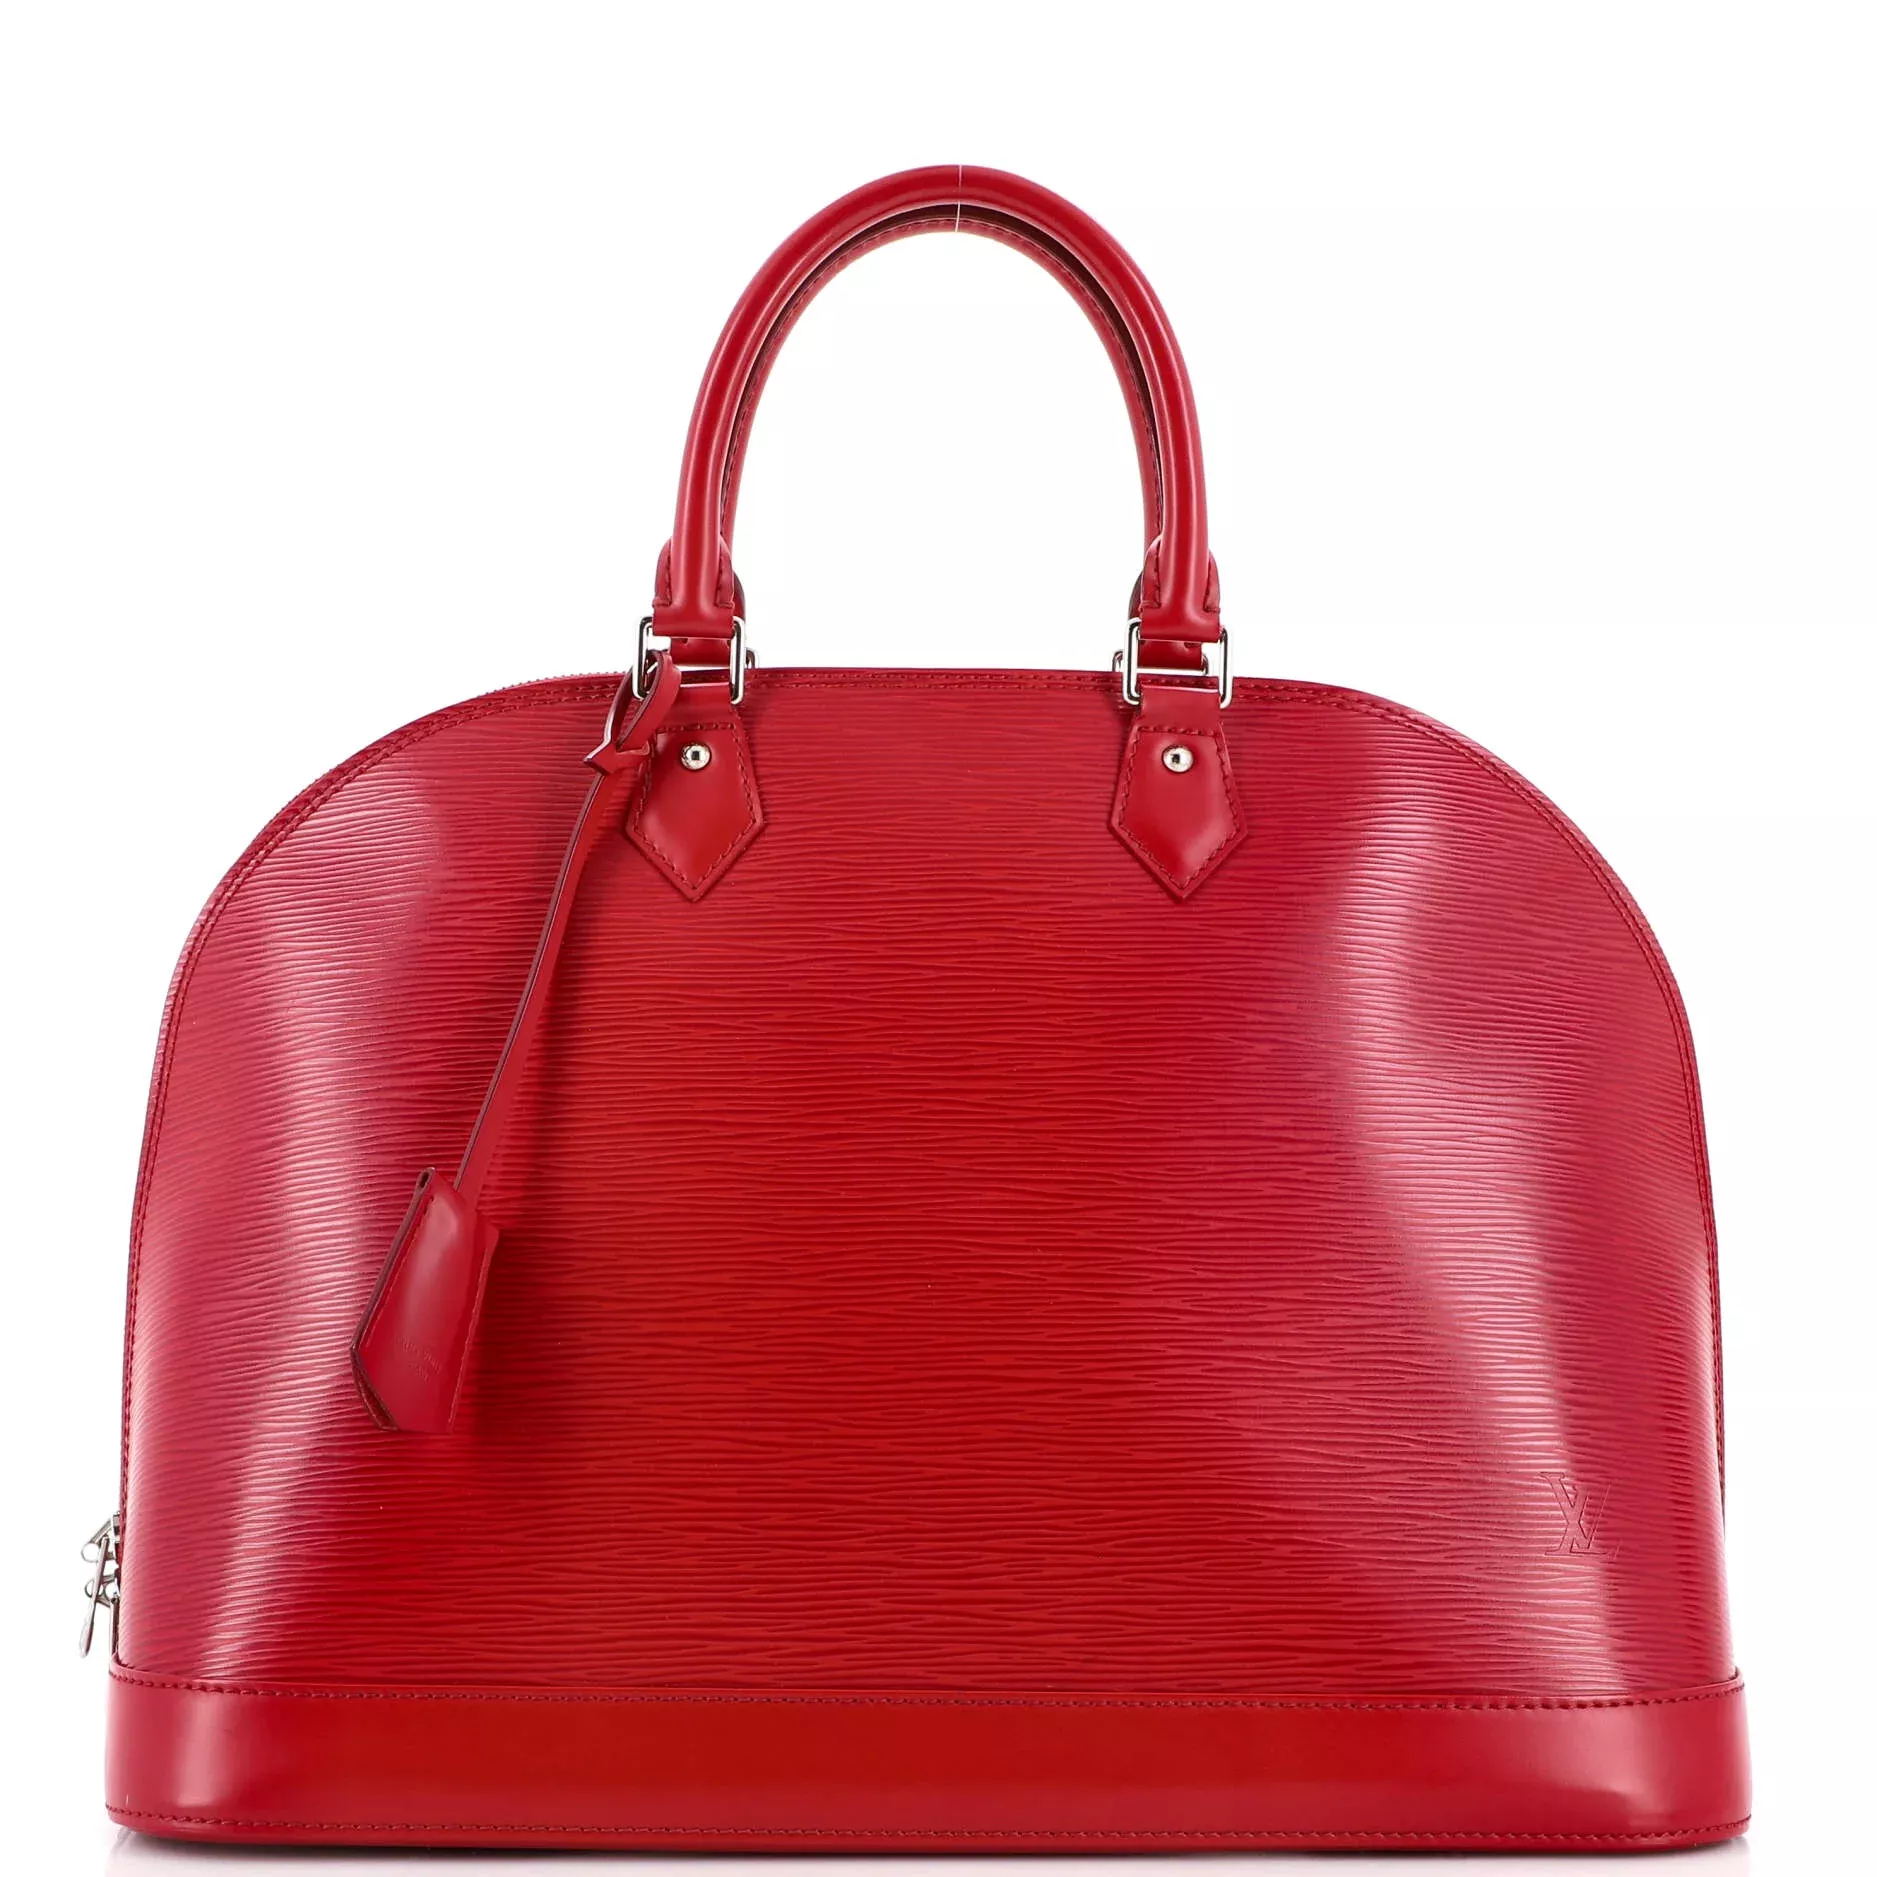 I have my eye on the Louis Vuitton Alma BB in epi leather. For